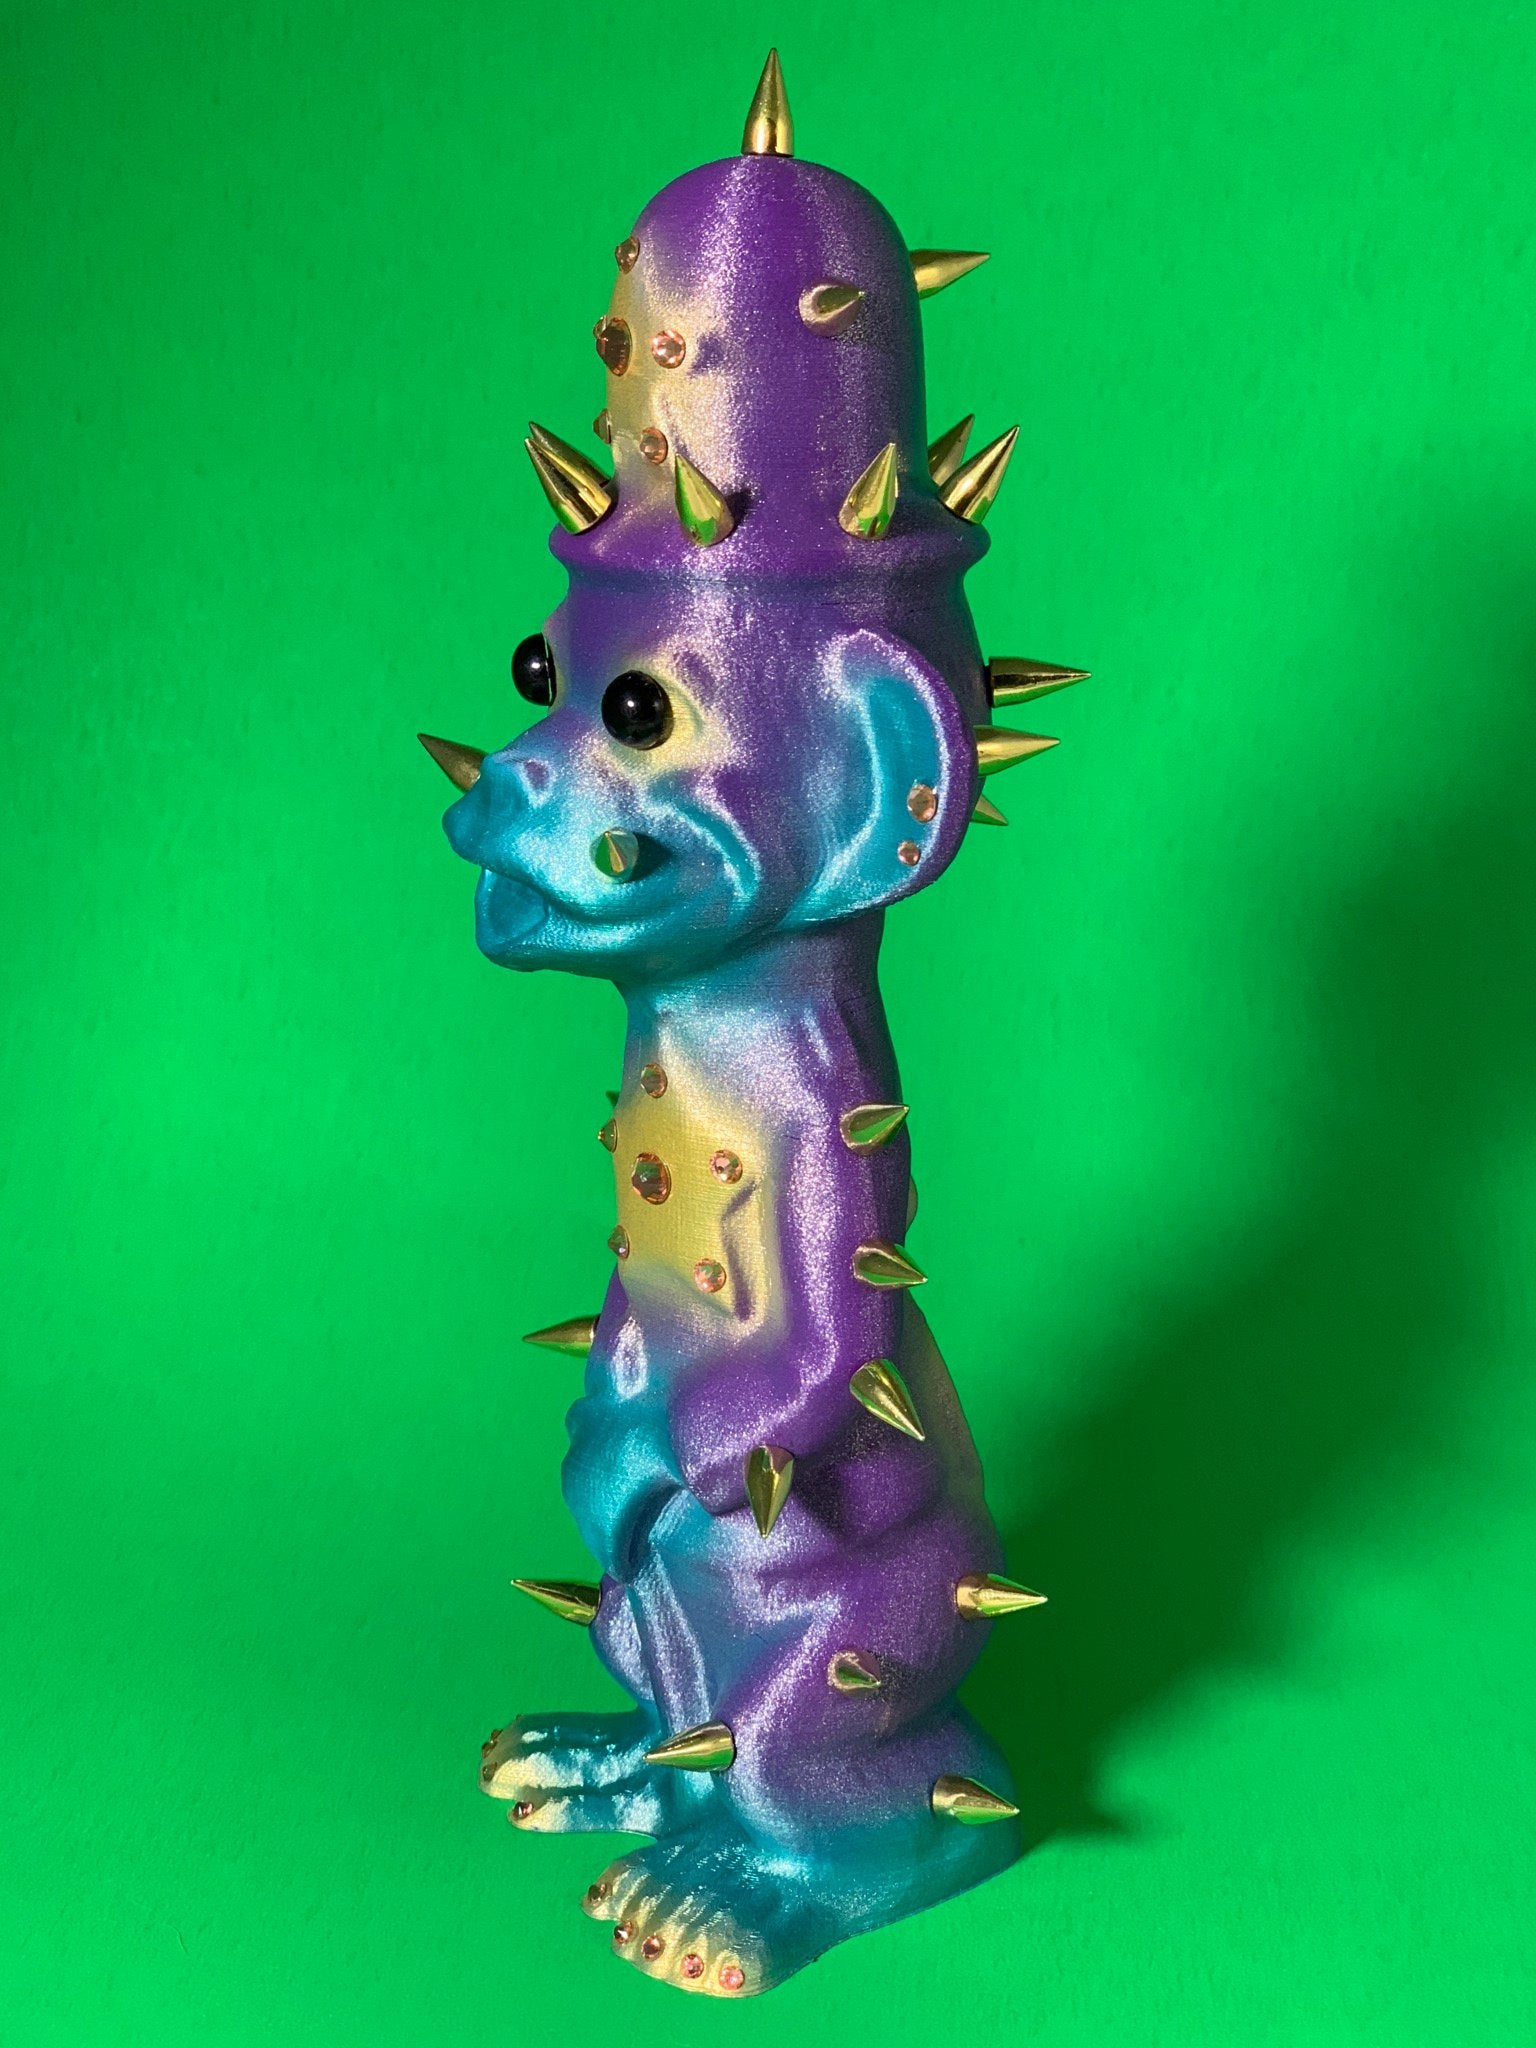 Flashy Monkey Cop: Teal, Purple and Gold